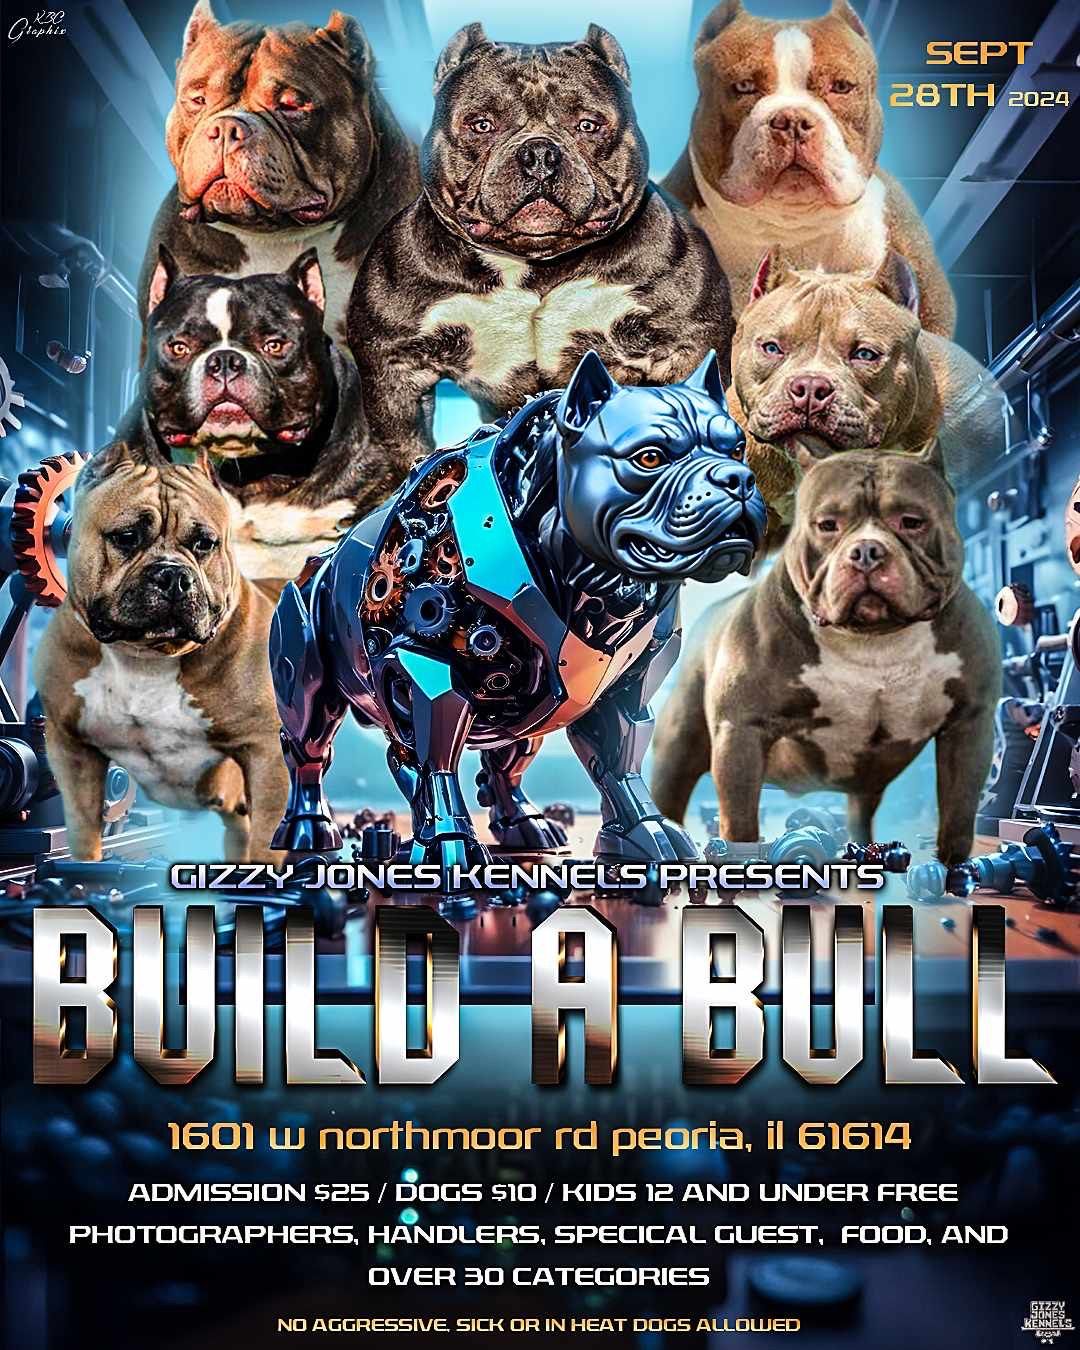 GIZZY JONES KENNELS BUILD-A-BULL FUN SANCTIONED SHOW